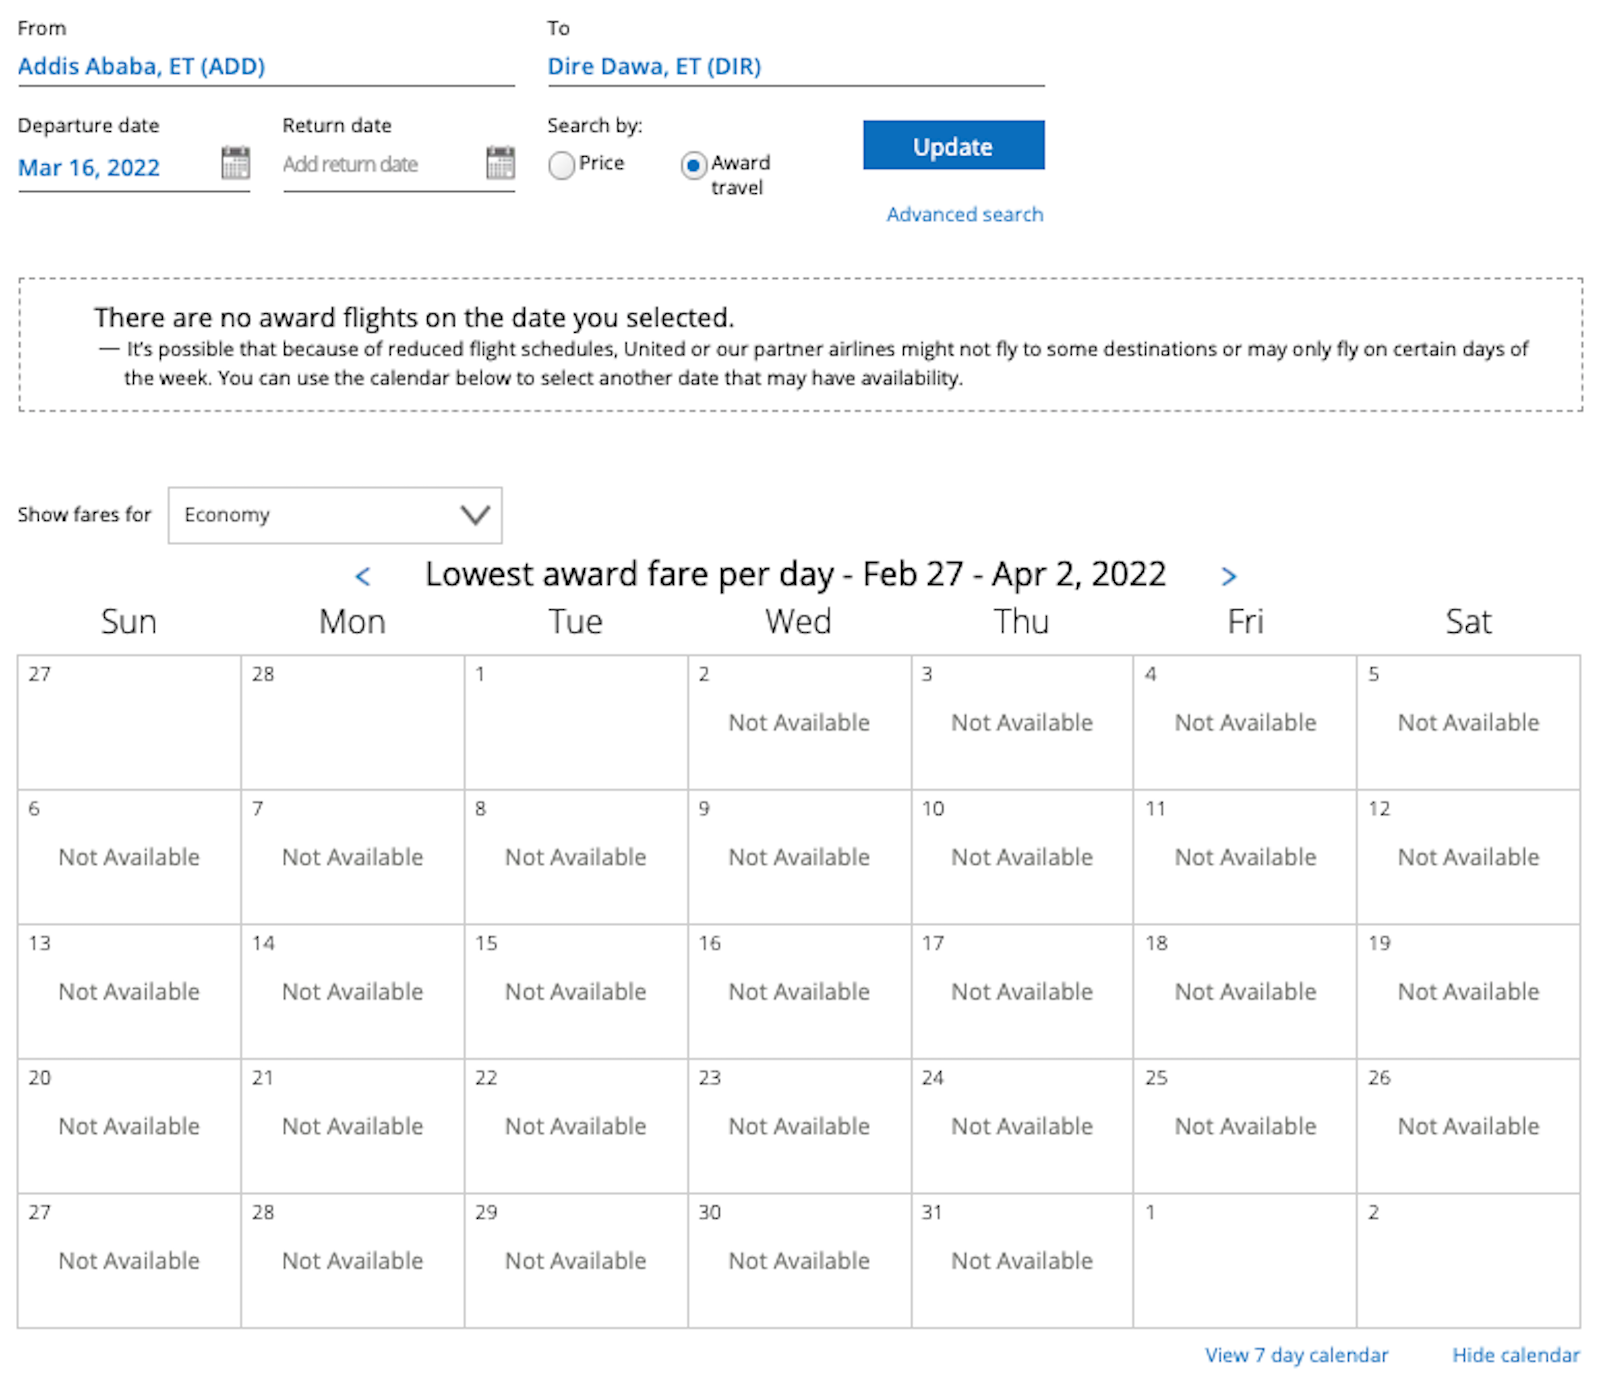 You Can't Book Ethiopian Flights with United Miles, United Not Sure Why